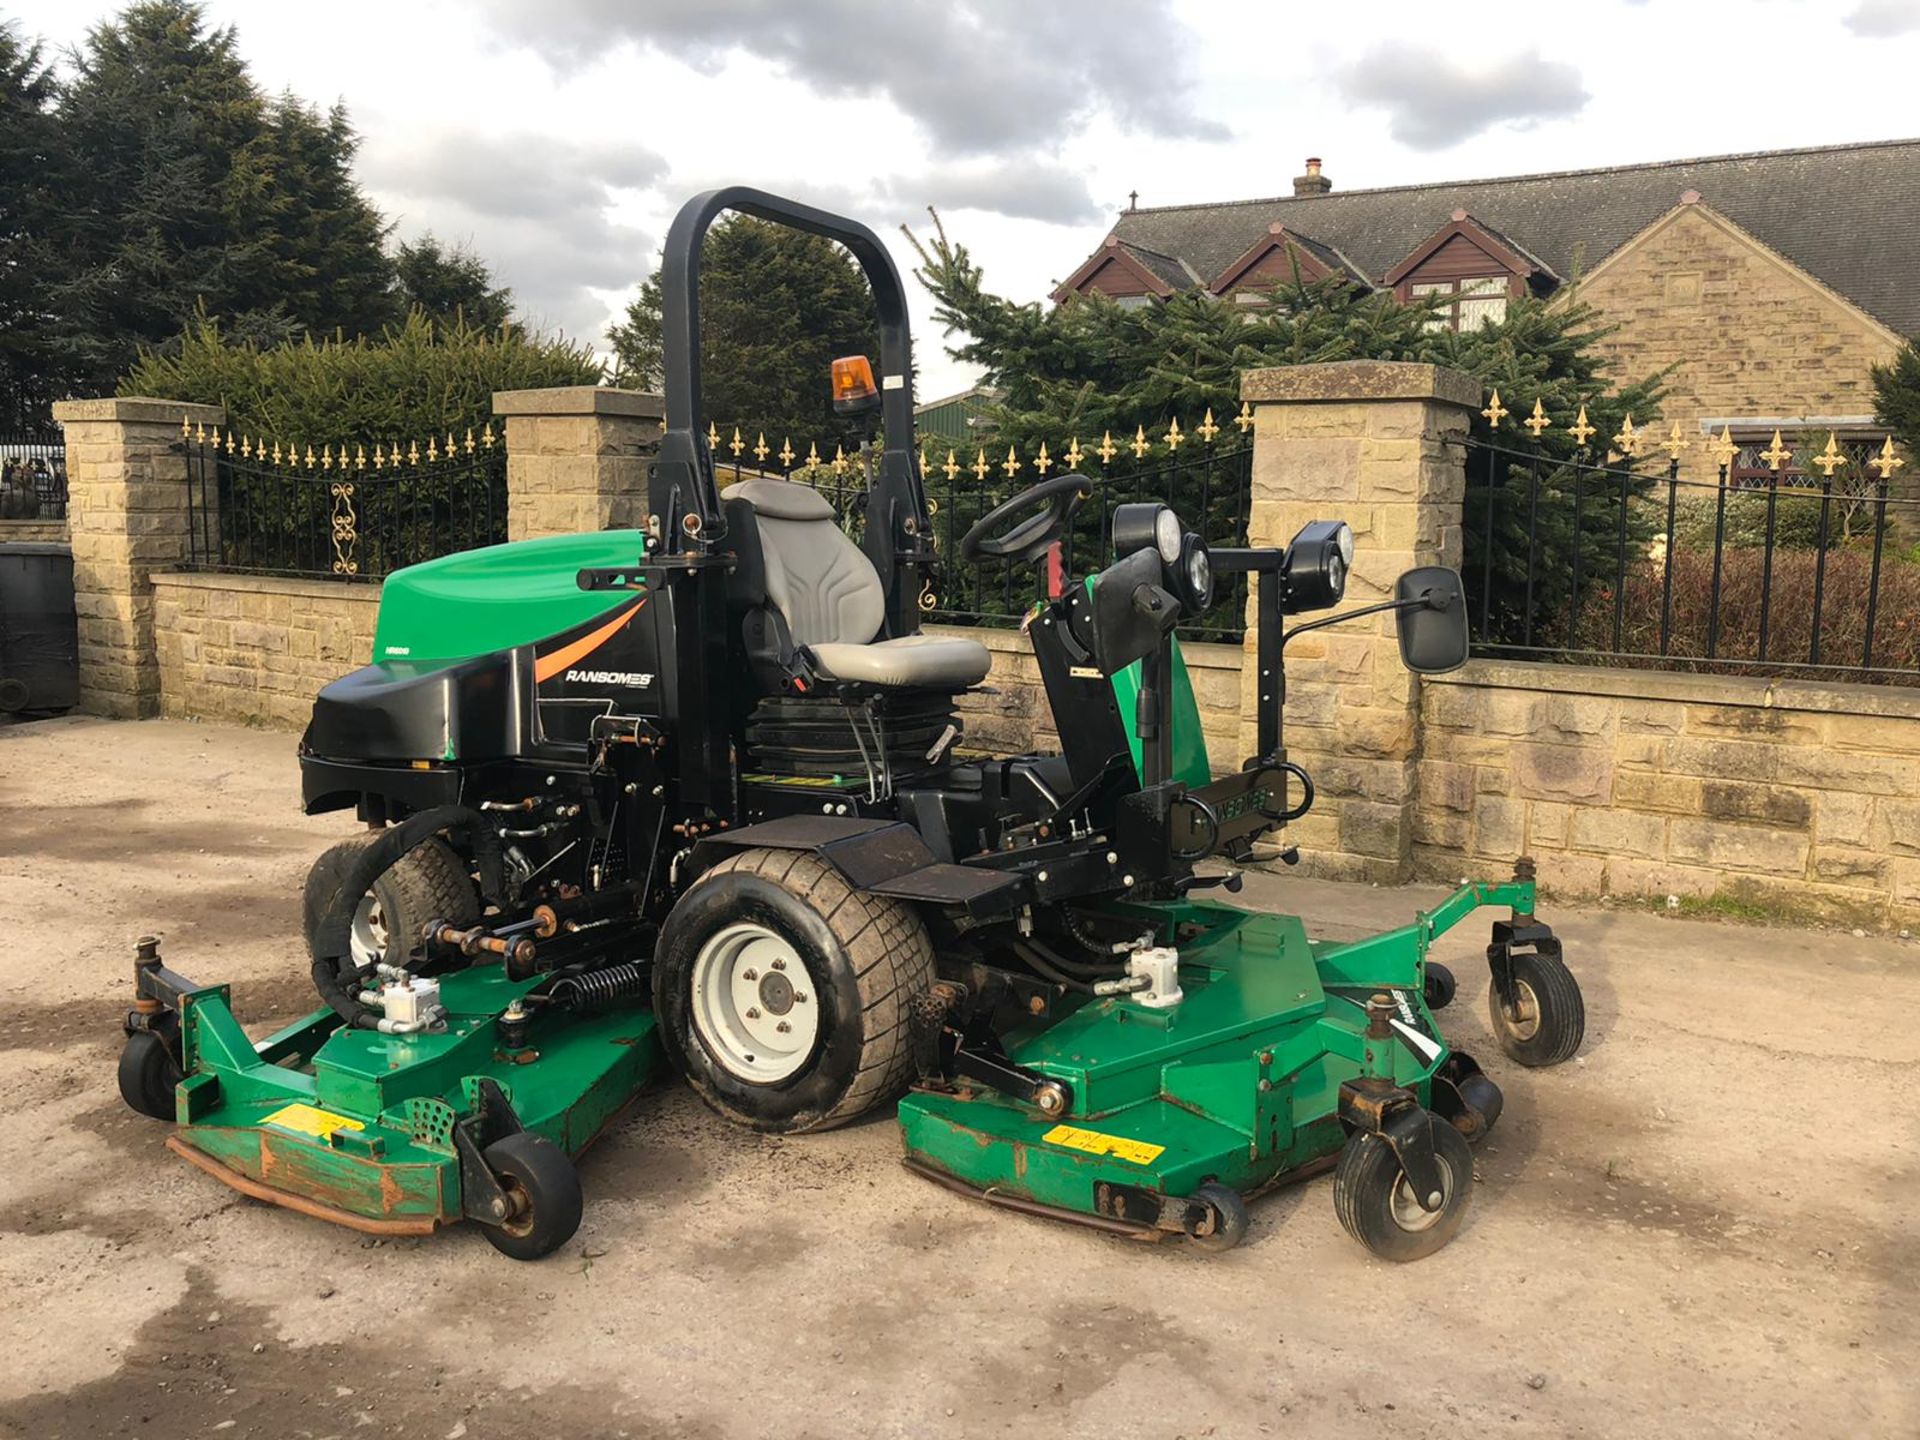 RANSOMES HR6010 BATWING RIDE ON LAWN MOWER, YEAR 2013/62 PLATE, 4 WHEEL DRIVE *PLUS VAT*